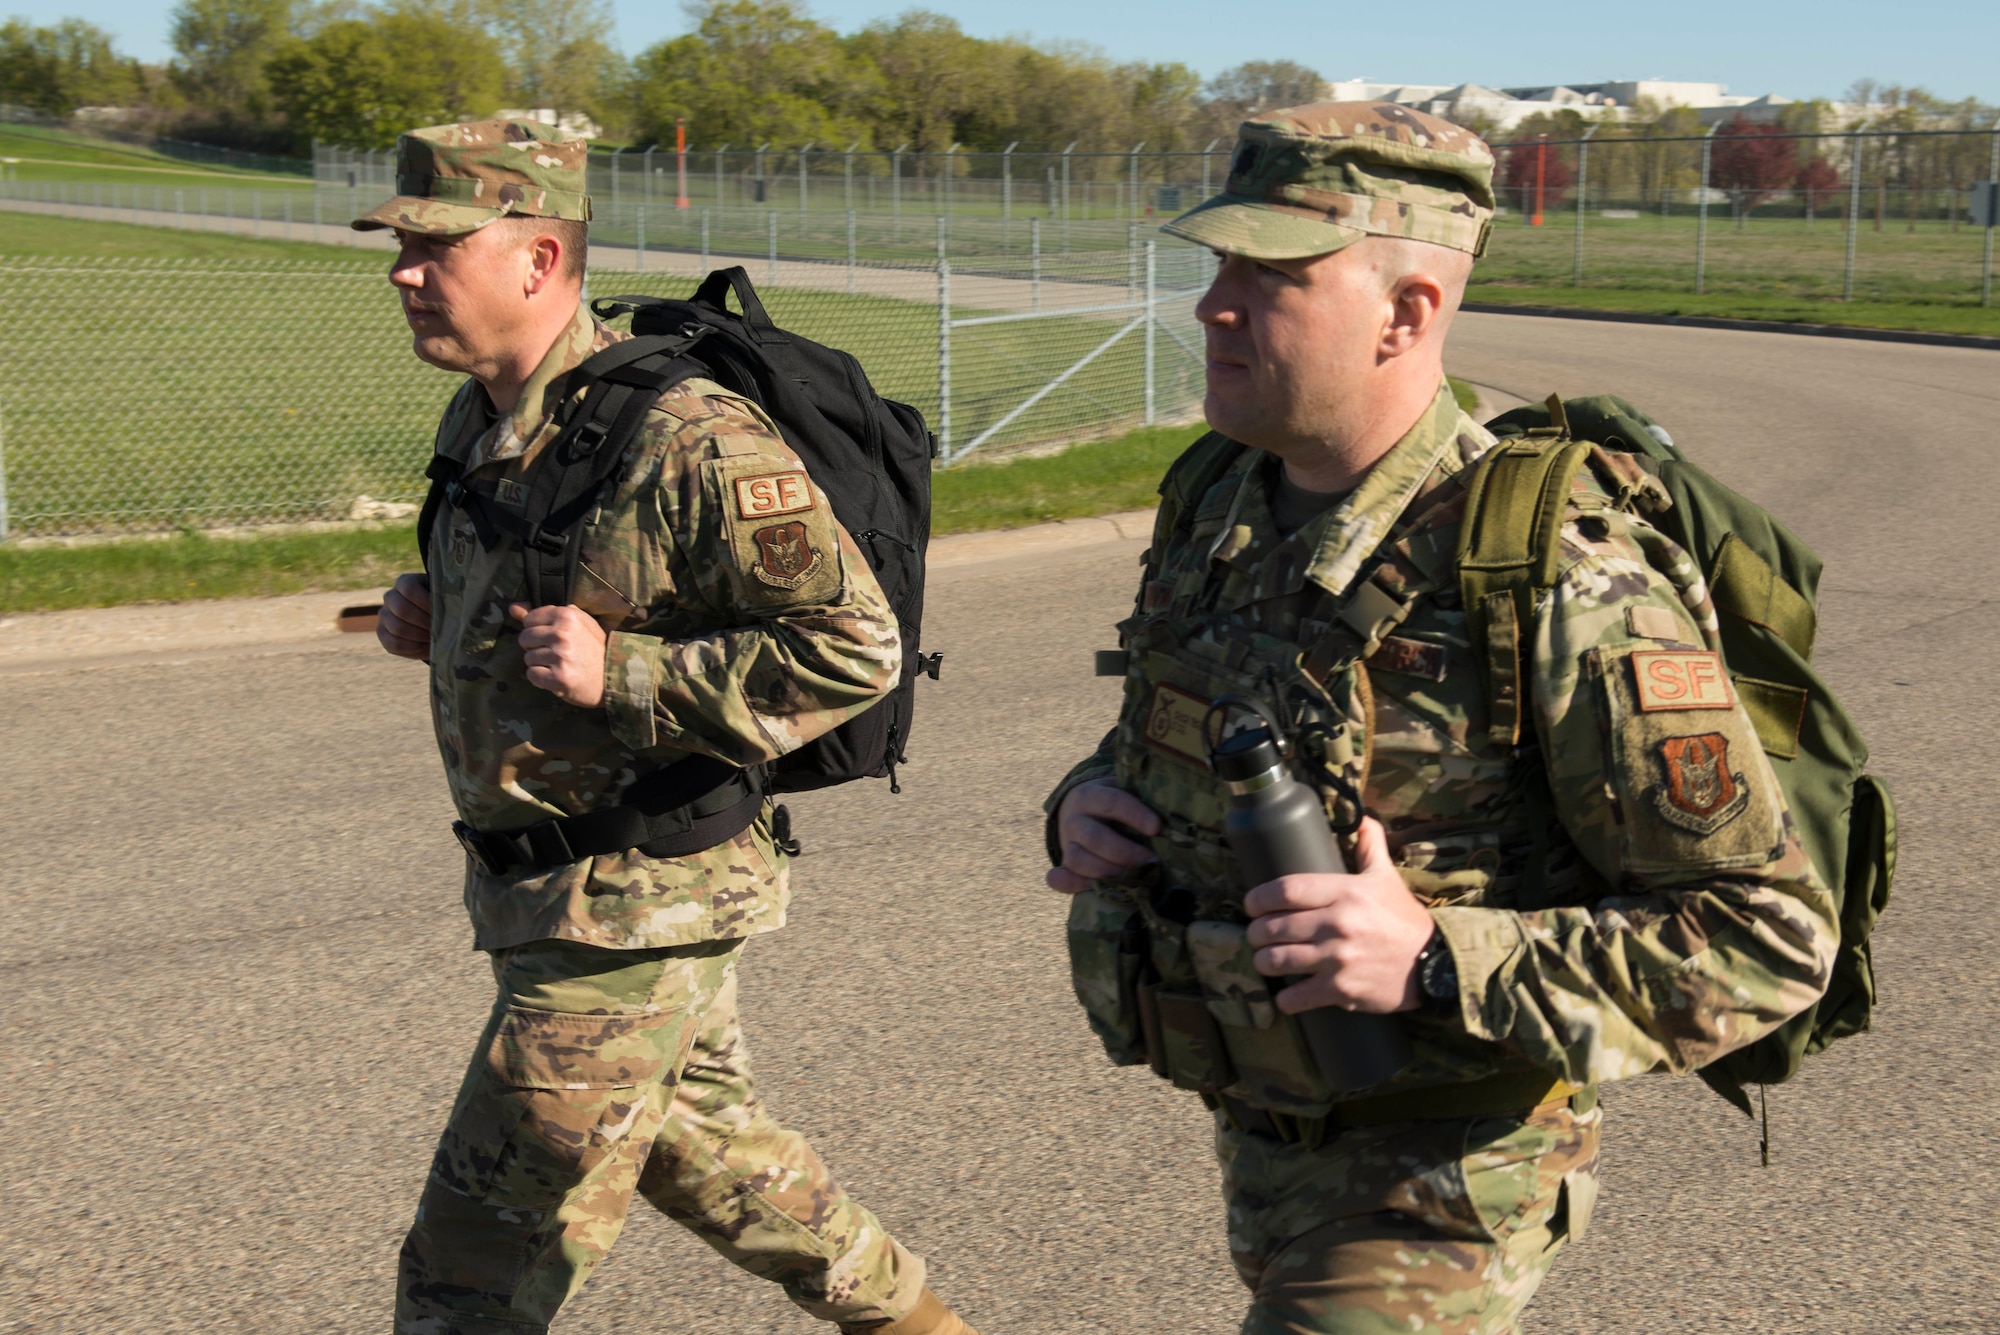 Master Sgt. Kory Soderquist (back left), 934th Security Forces Squadron chief of training, and Lt. Col. Charles Trovarello (back right), 934th Security Forces Squadron commander, each carry 40-pound ruck sacks during a 4.5 mile ruck march in support of the Resolute Defender Ruck Challenge at Minneapolis-St. Paul Air Reserve Station, April 30, 2021. The intent for this 12 month challenge is to build and solidify resiliency, camaraderie, and communication. Currently, 40 Airmen and civilians, comprising 19 different teams, are taking part in the challenge. (Air Force photo by Chris Farley)